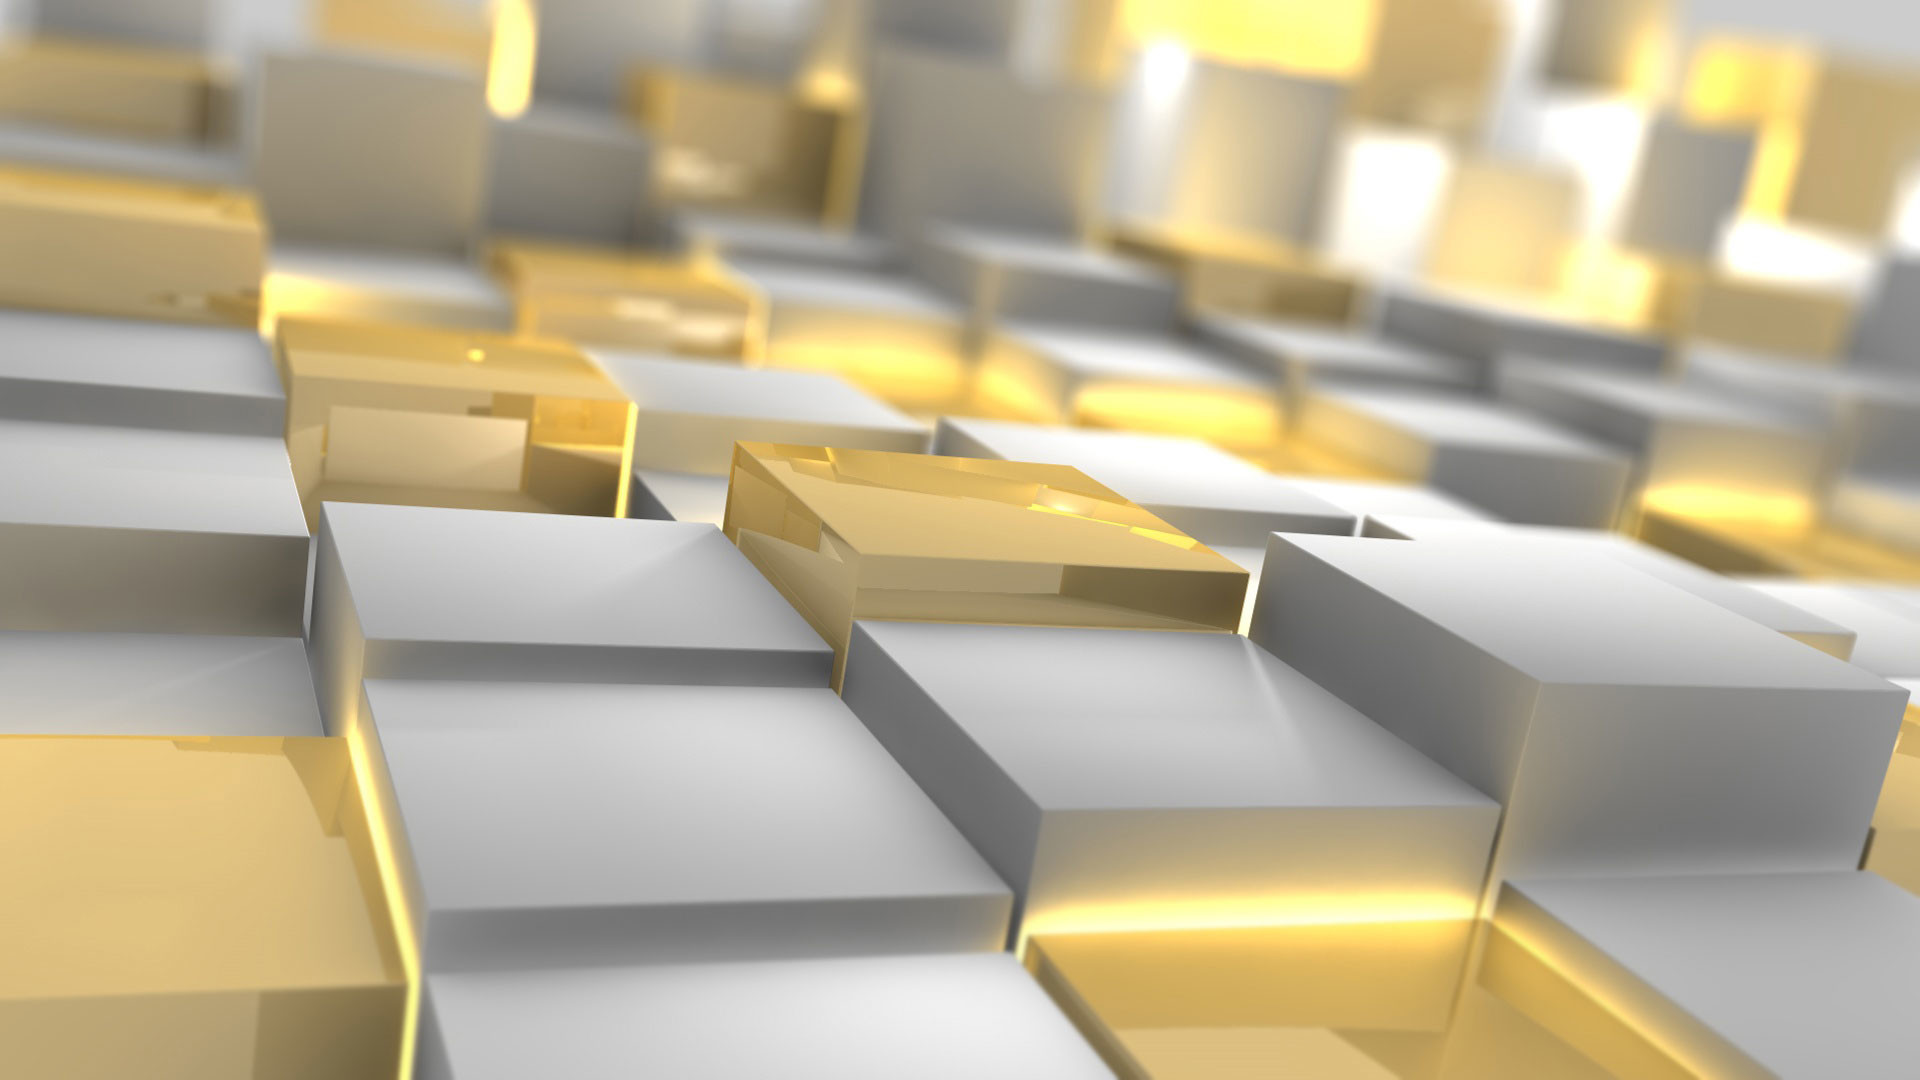 1920x1080 ... glowing 3d cubes white gold hd quality desktop background ...